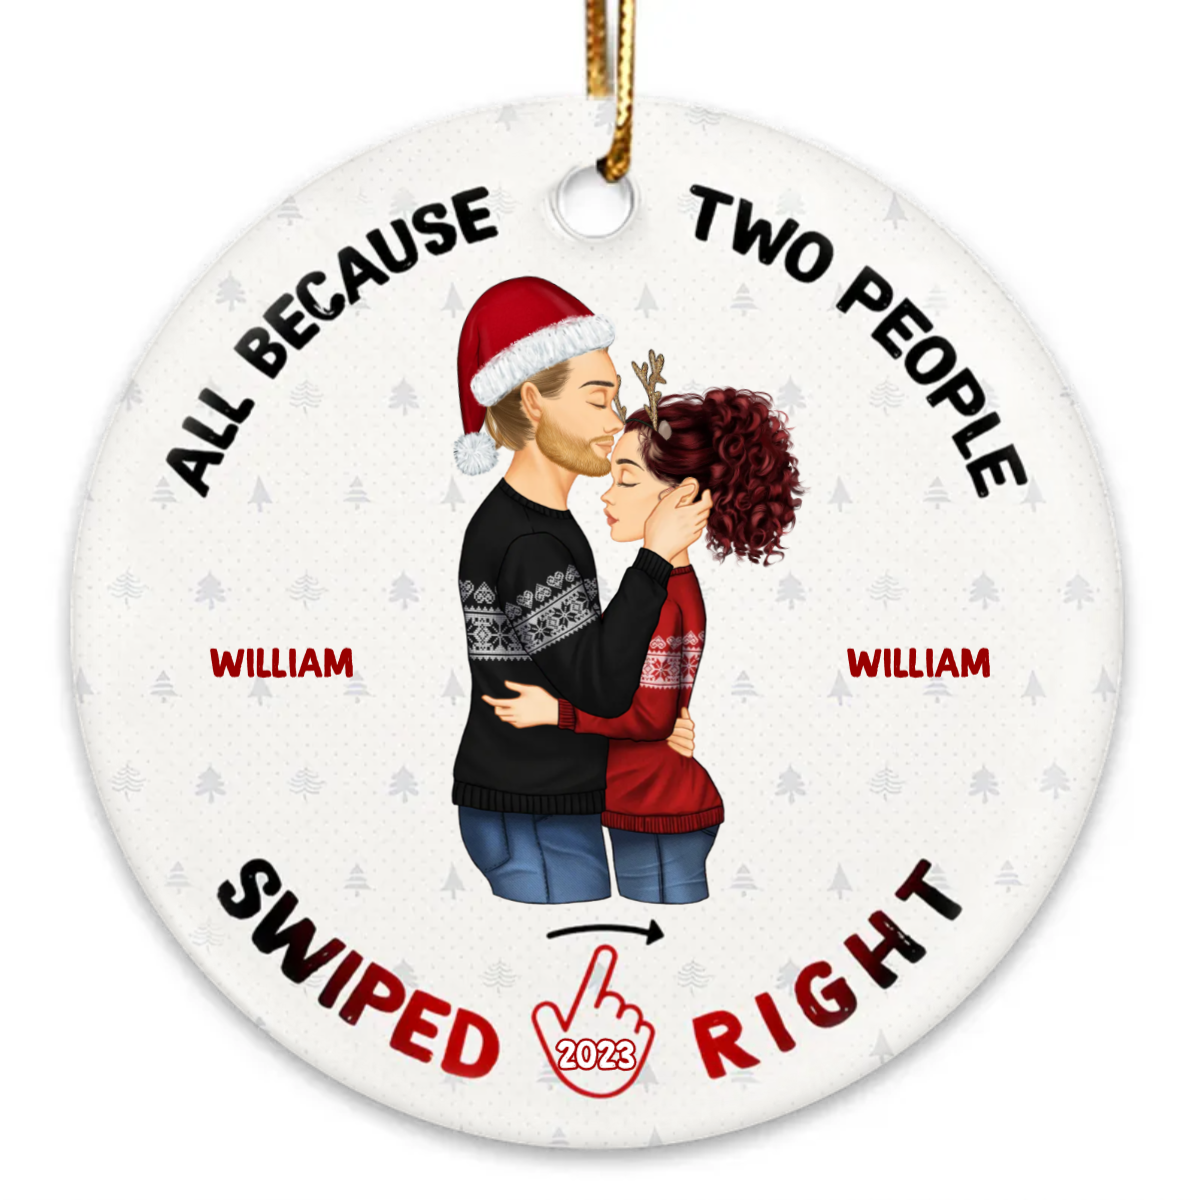 Christmas Gift For Couples - Swiped Right - Personalized Circle Ceramic Ornament